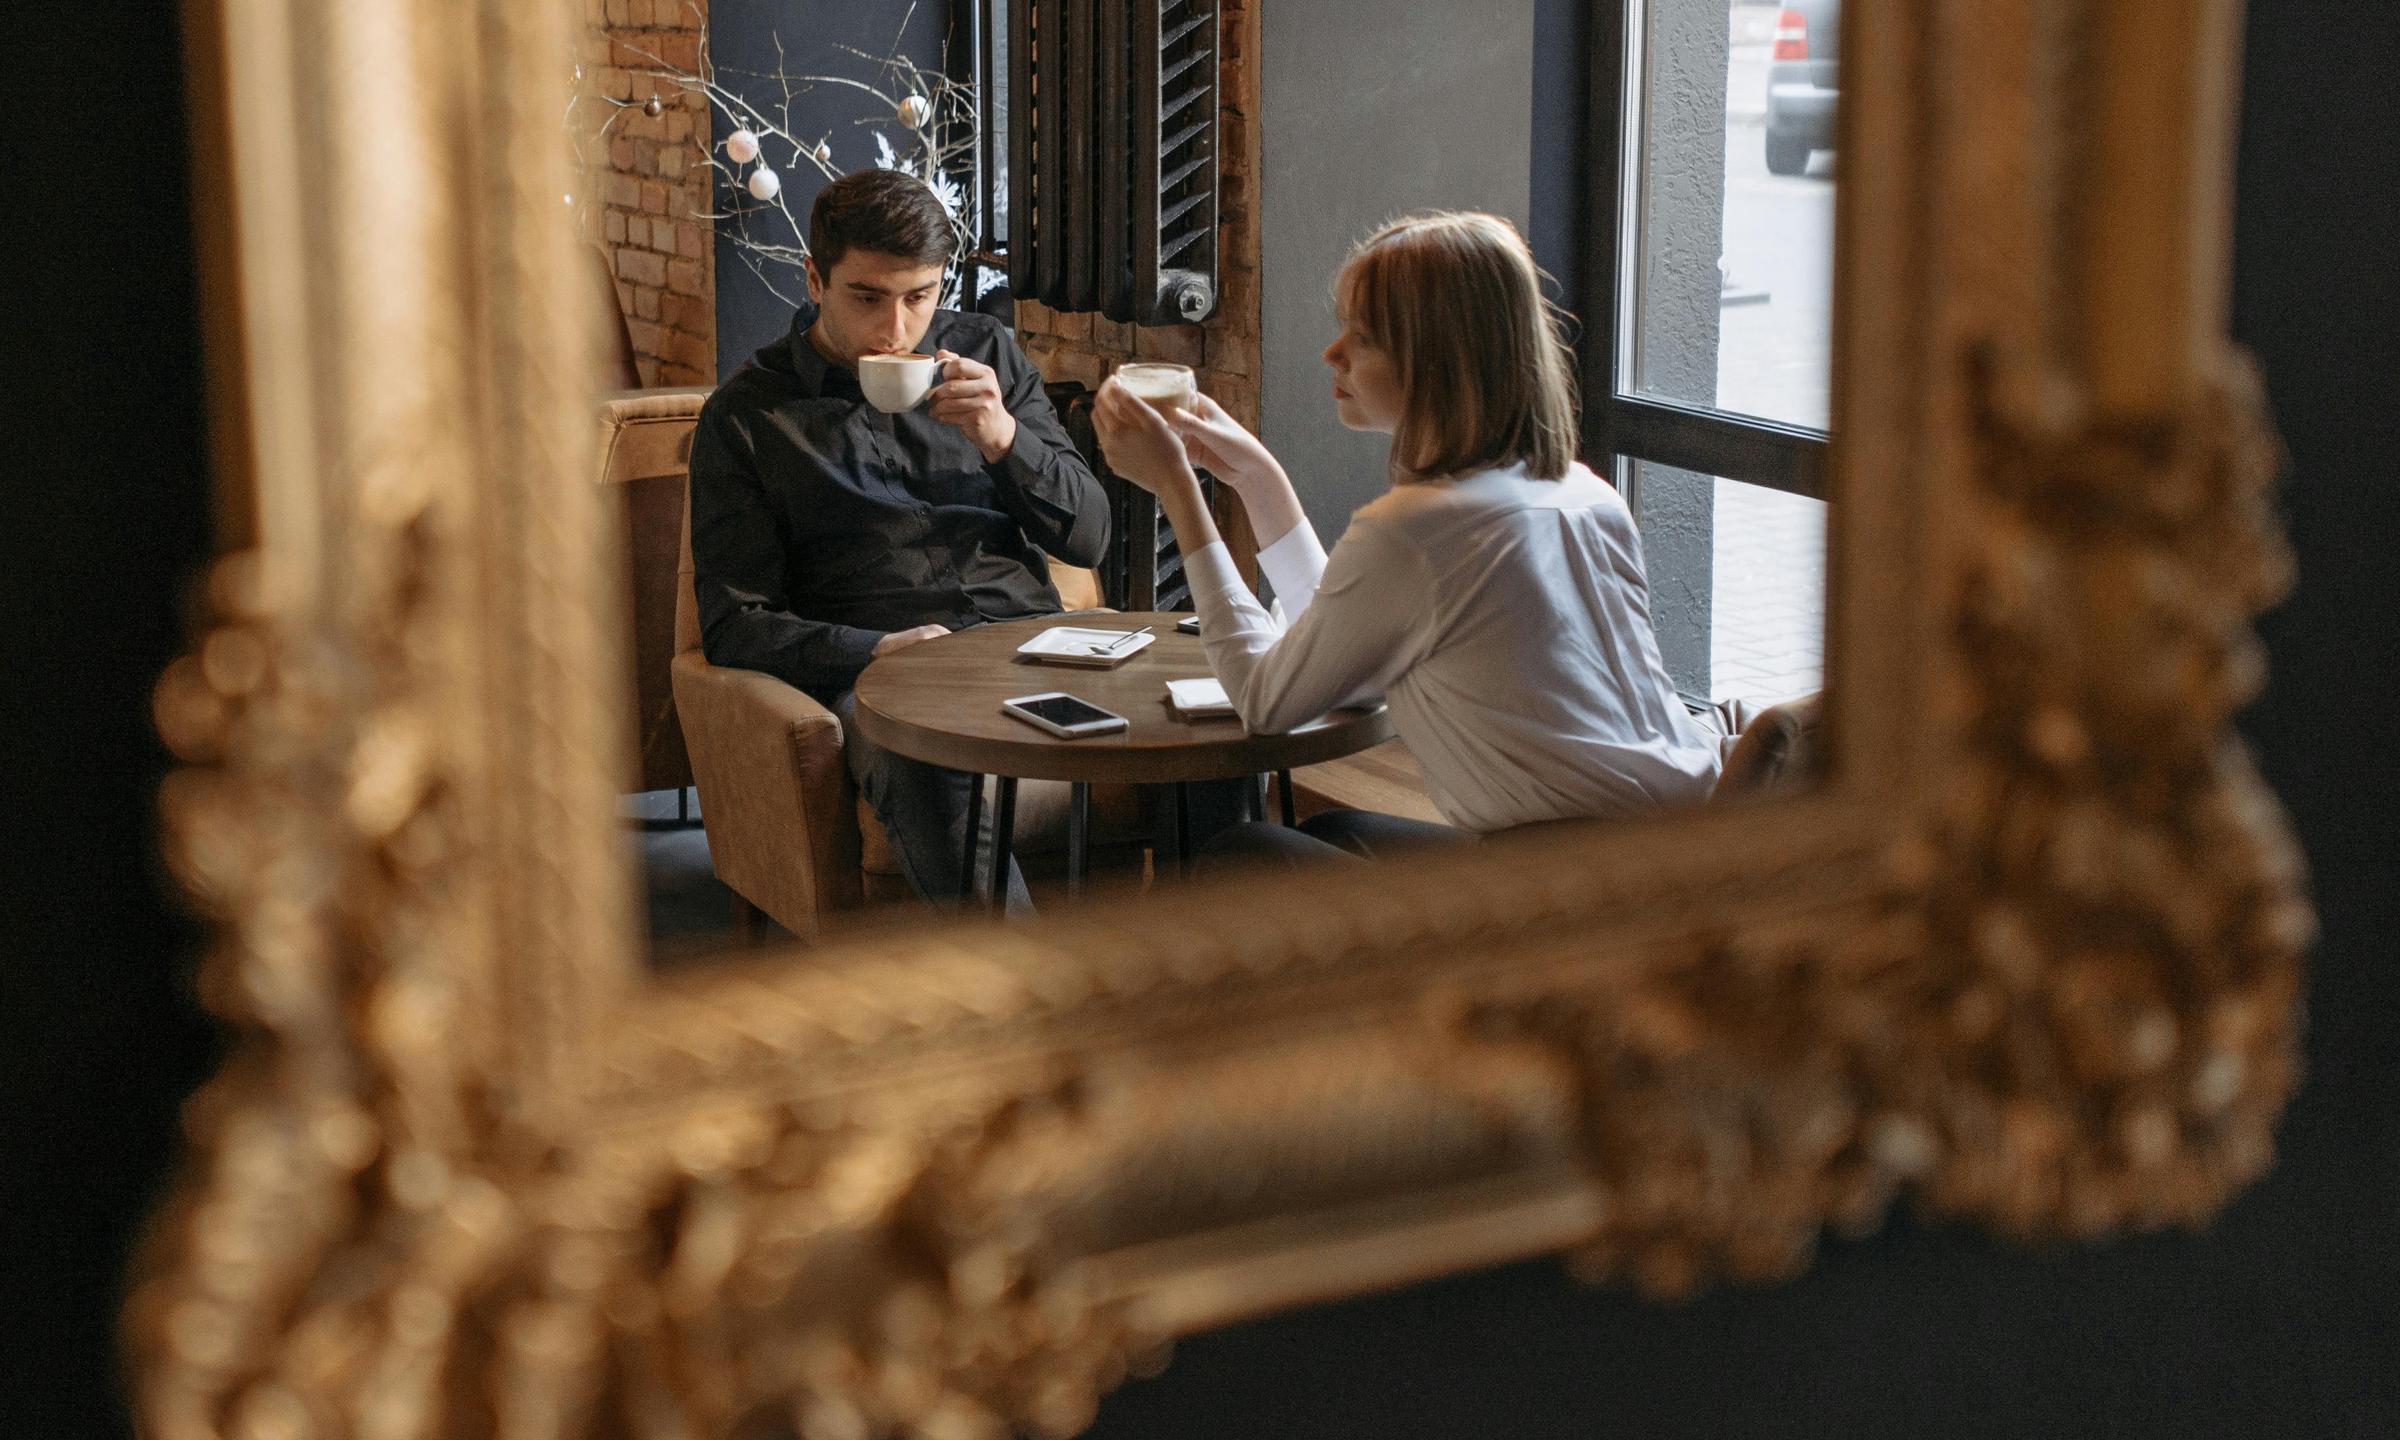 A man and woman seen reflected in a cafe mirror | Source: Pexels